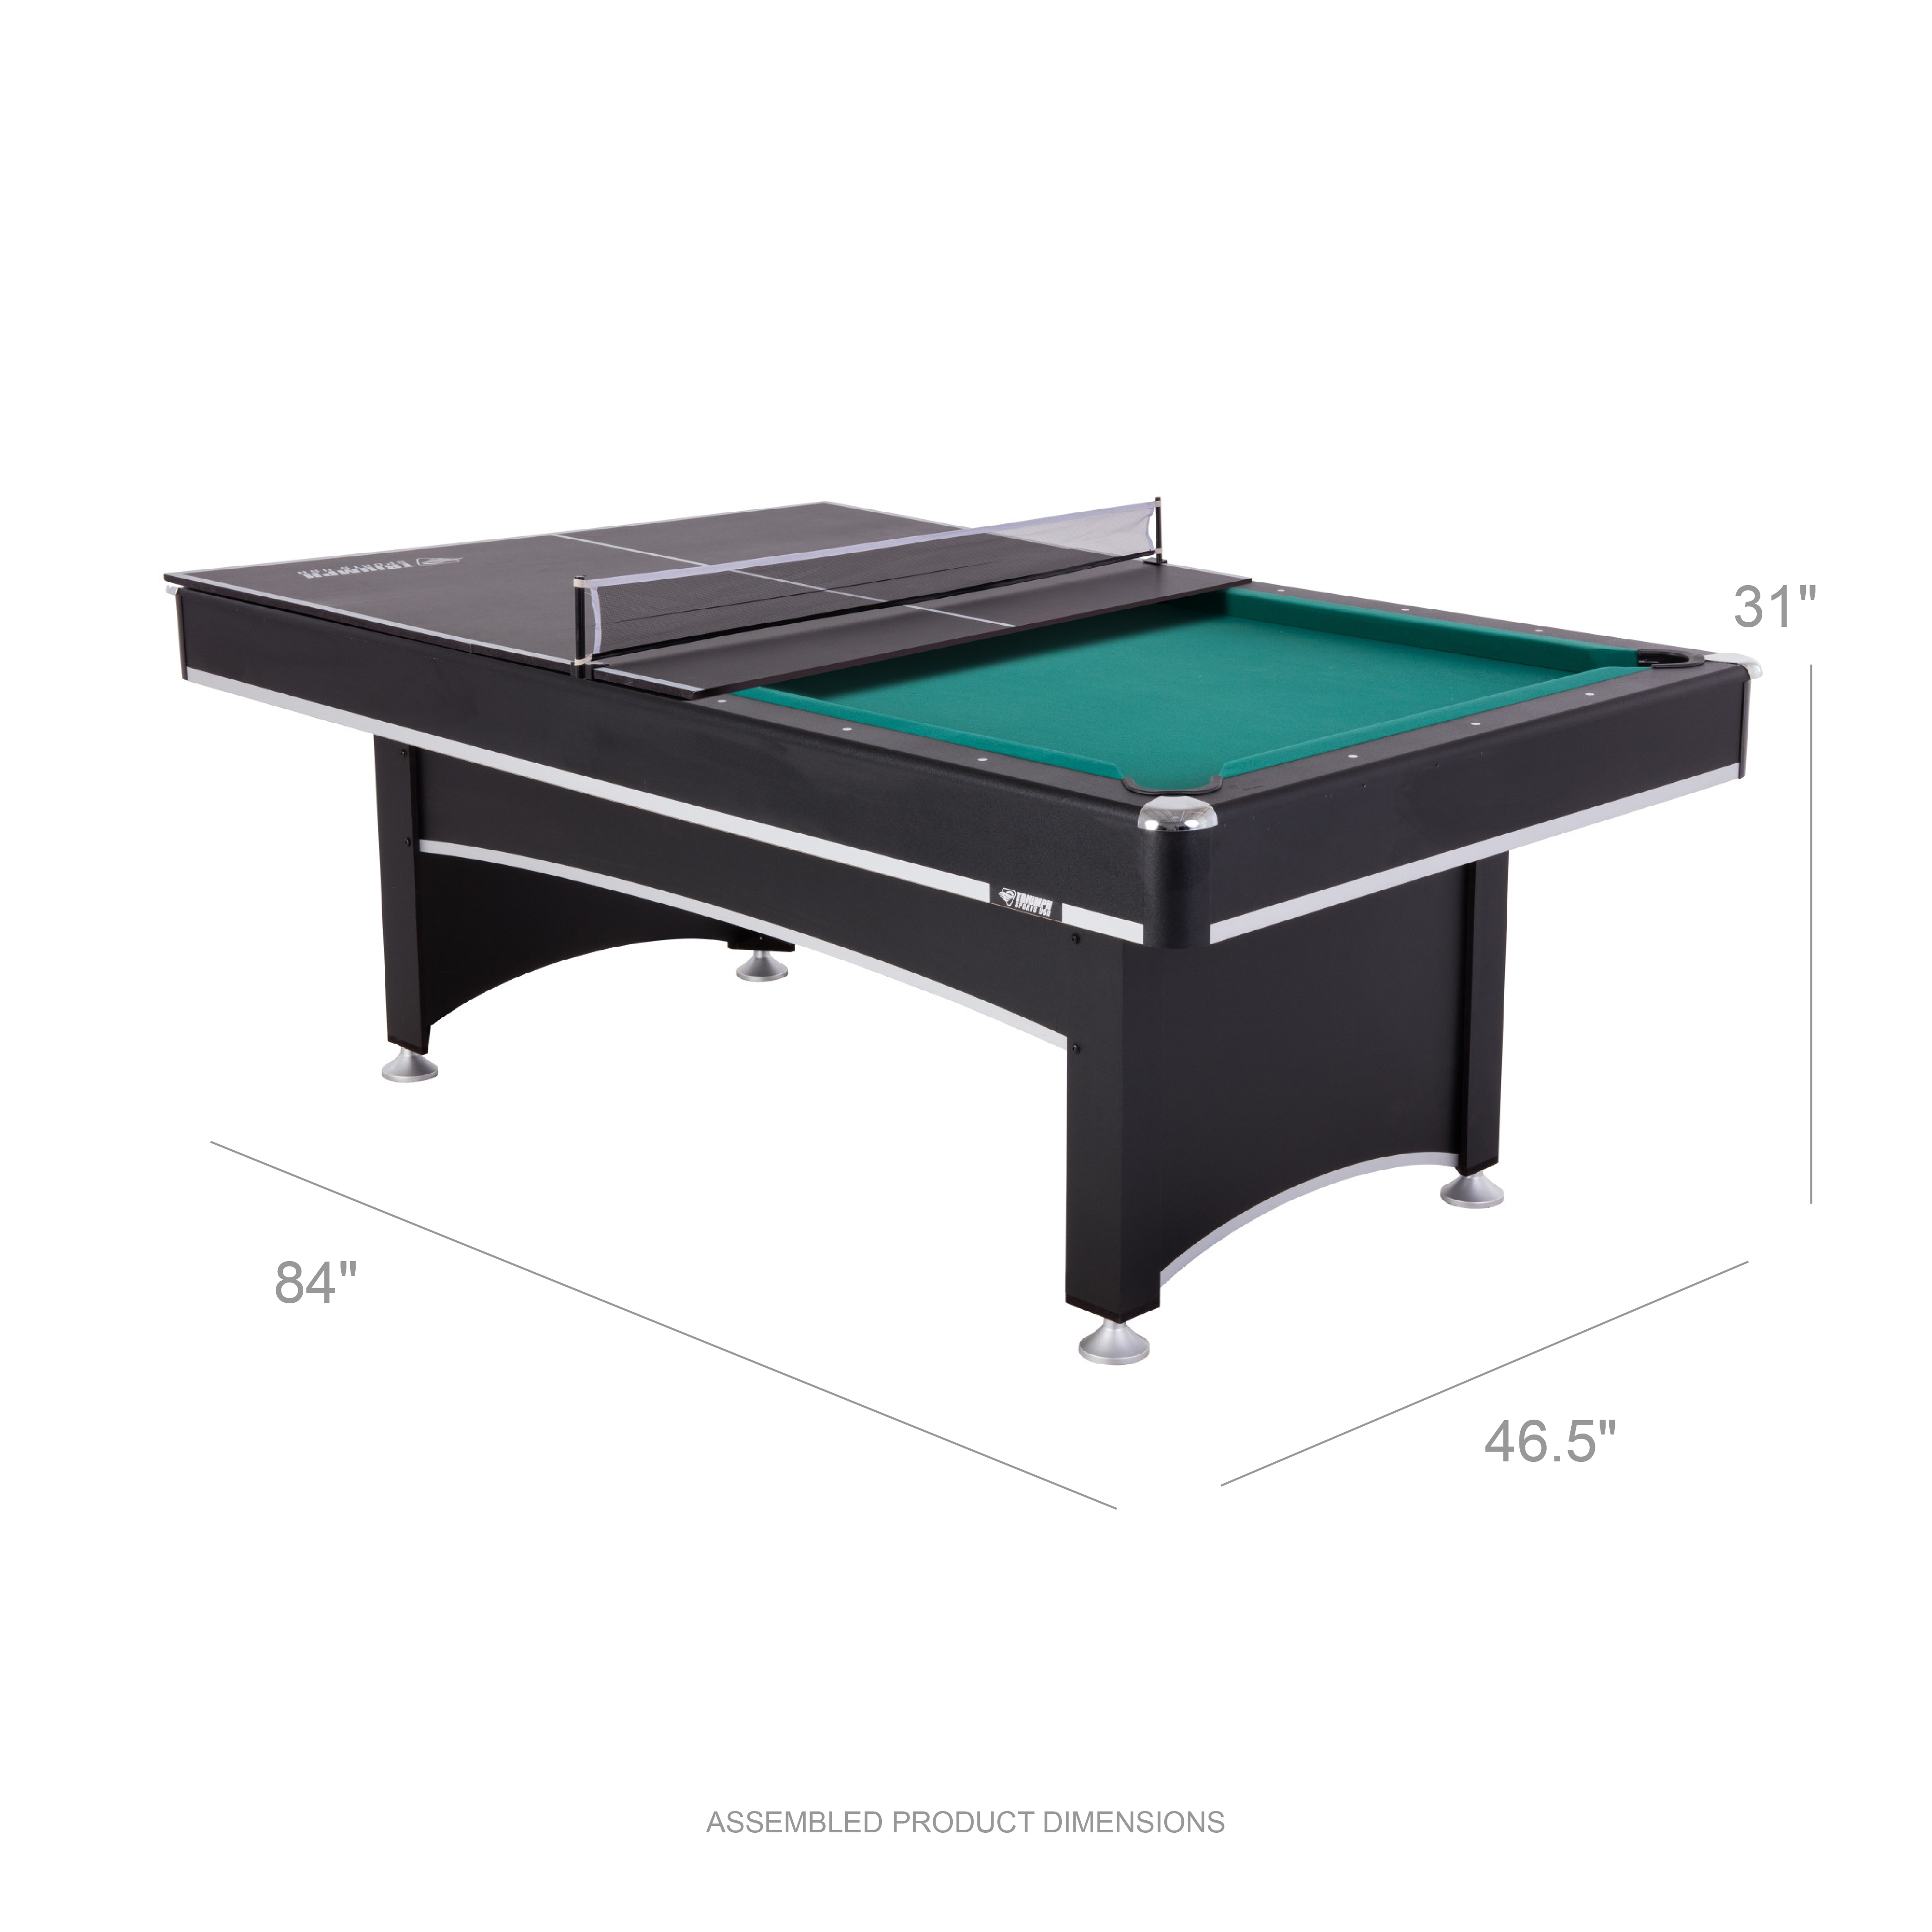 Triumph Sports USA 45-6102 84 in. Arcade  Billiard Table with Table Tennis Top - image 3 of 18